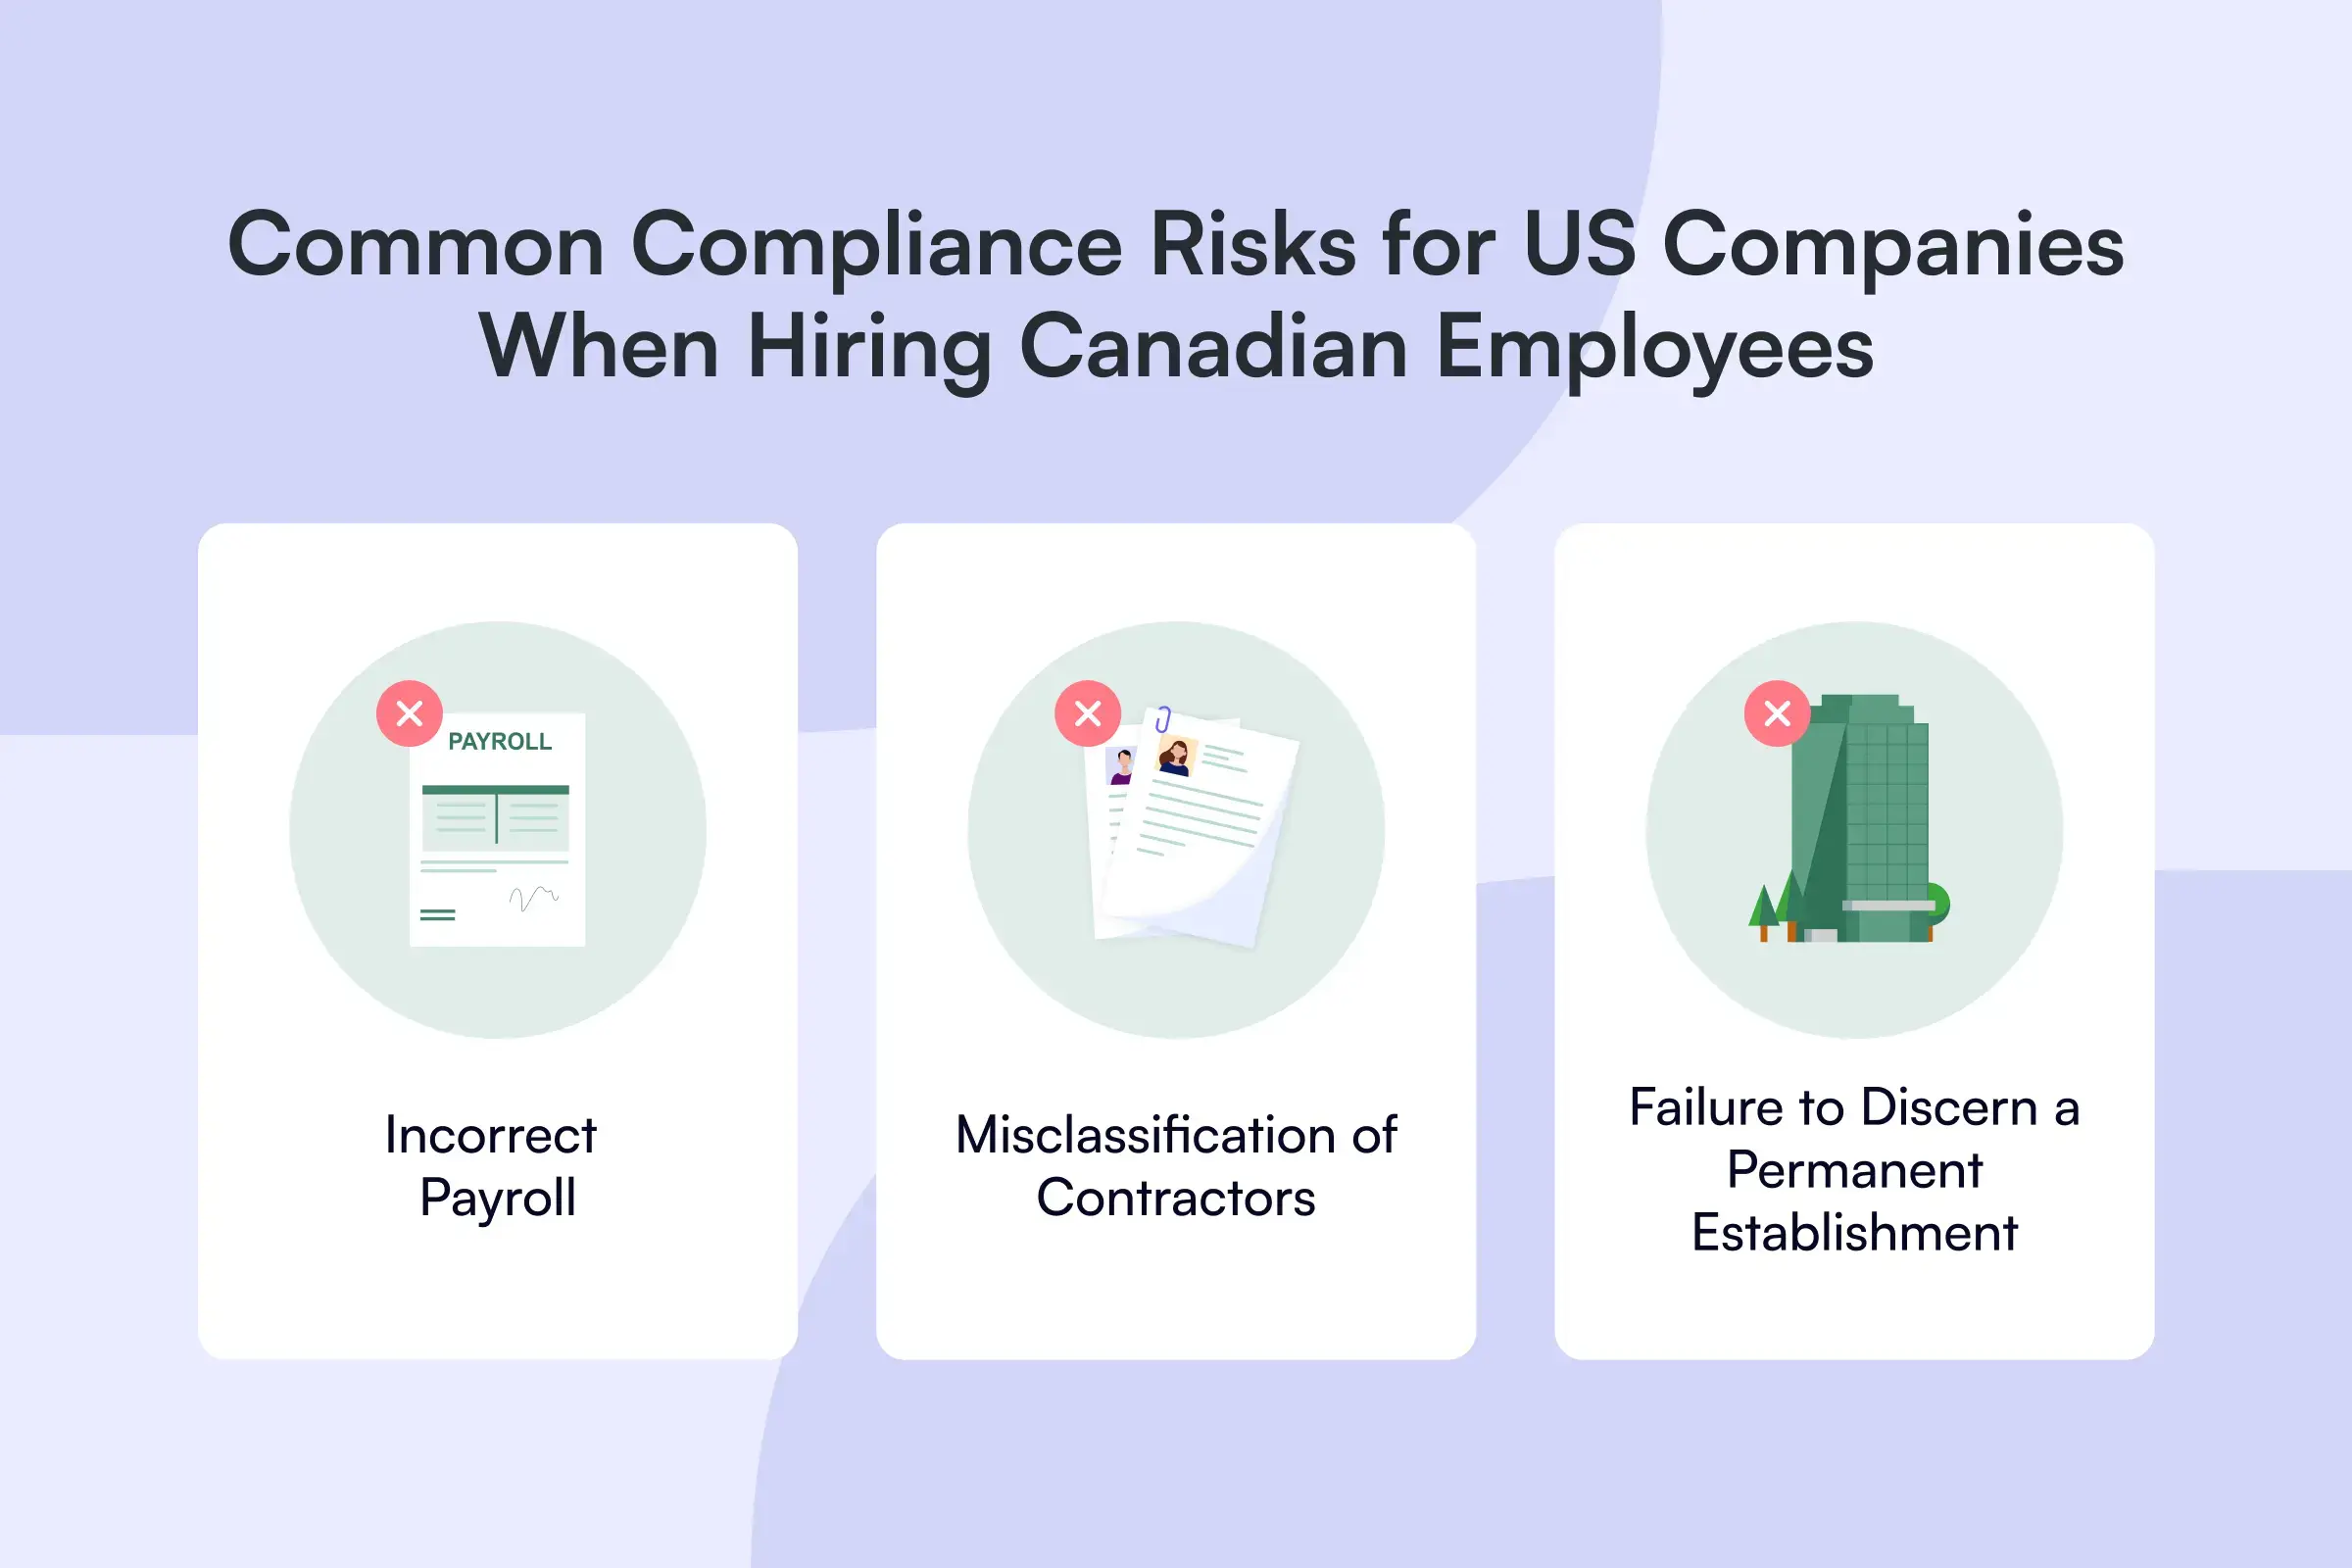 Common compliance risks for US companies when hiring Canadian employees